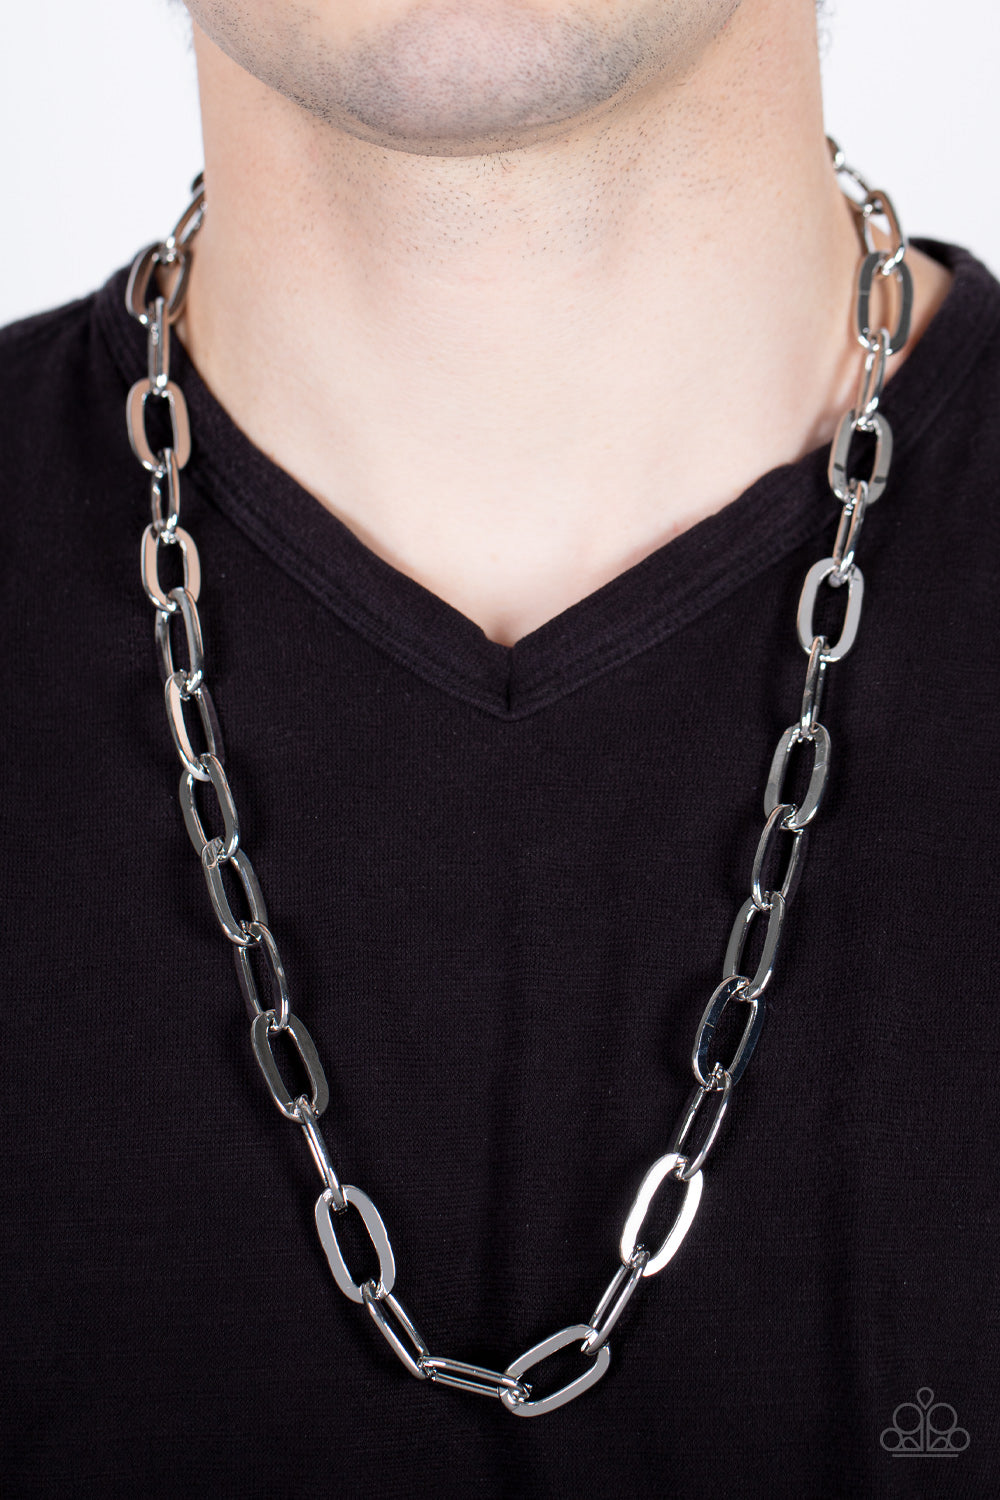 Paparazzi Accessories Urban Quarterback - Silver Featuring a high sheen finish, a shiny collection of oversized silver oval links boldly interlock across the chest for a grit-inspired look. Features an adjustable clasp closure. Sold as one individual neck